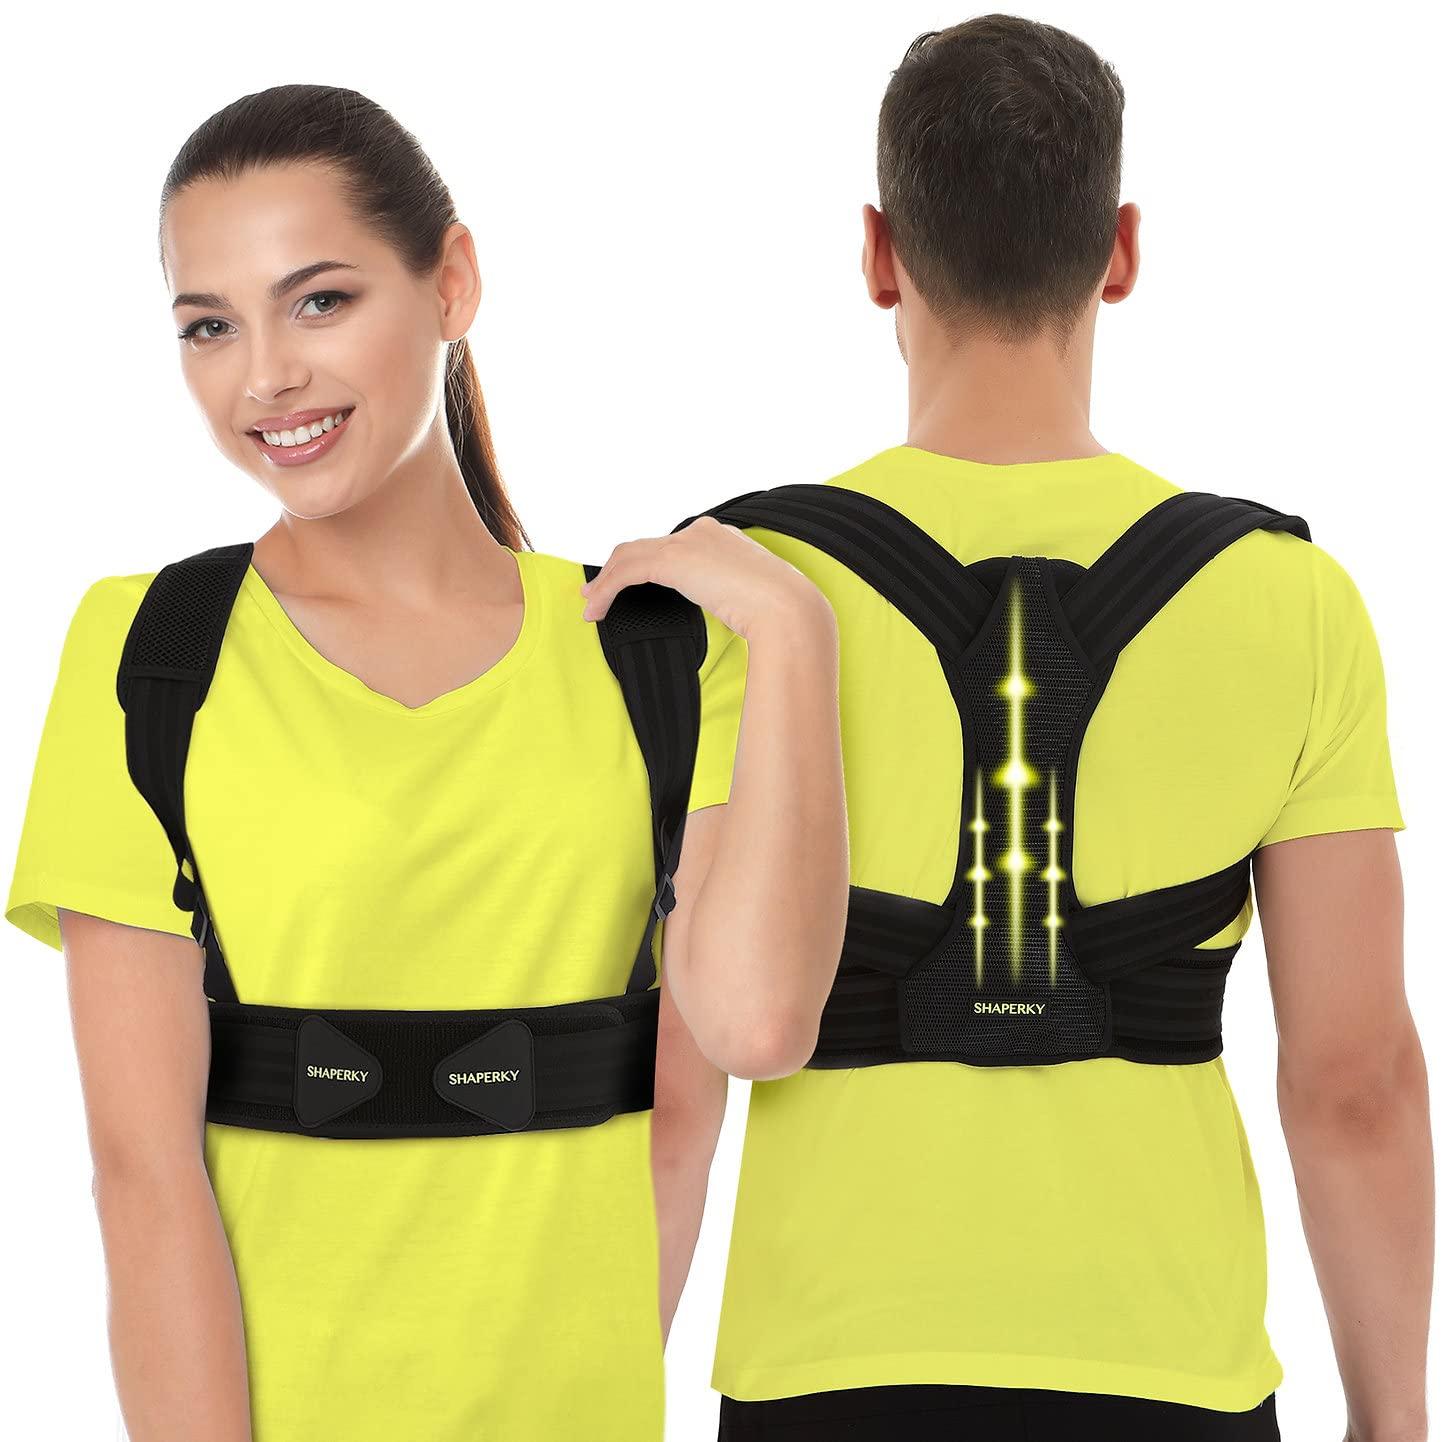  SHAPERKY Posture Corrector for Women and Men